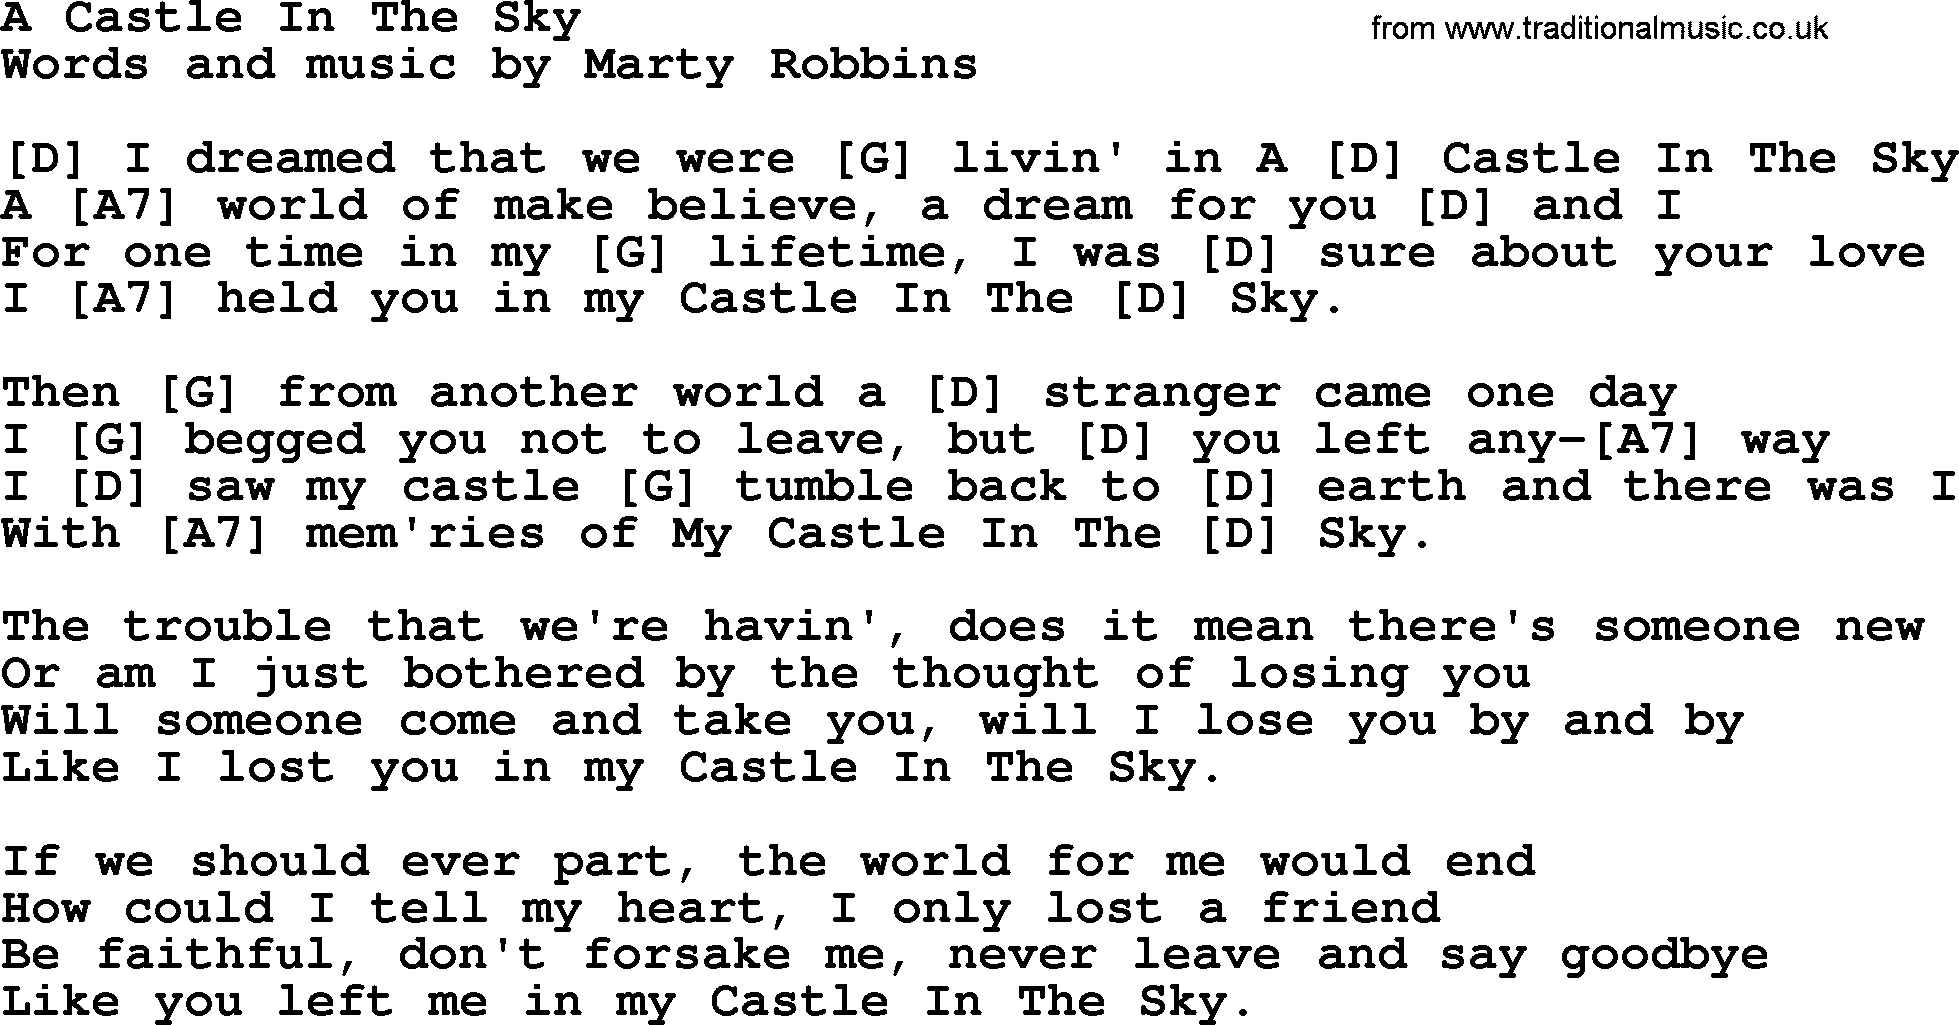 Marty Robbins song: A Castle In The Sky, lyrics and chords